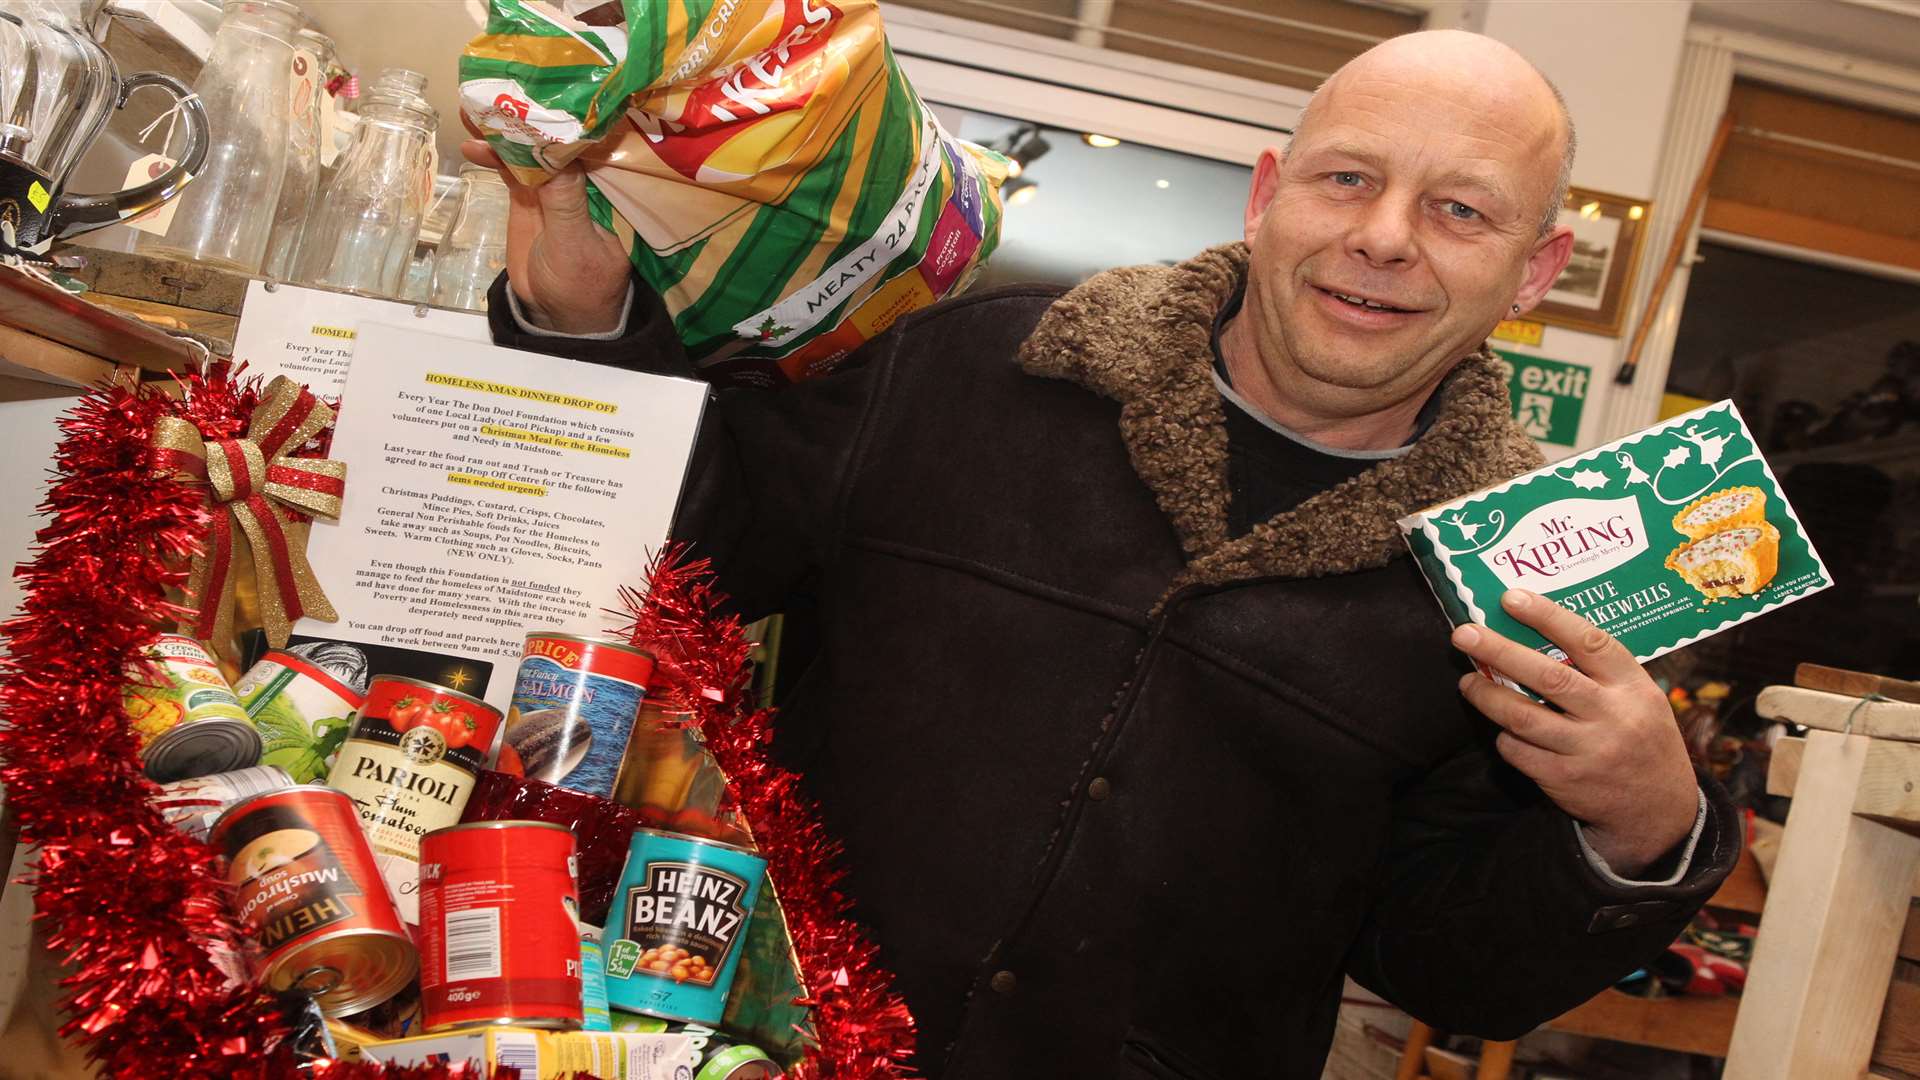 Tony Dambiec, shop employee and former homeless man at Trash or Treasure, is running a collection of food for the homeless in Maidstone. Picture: John Westhrop